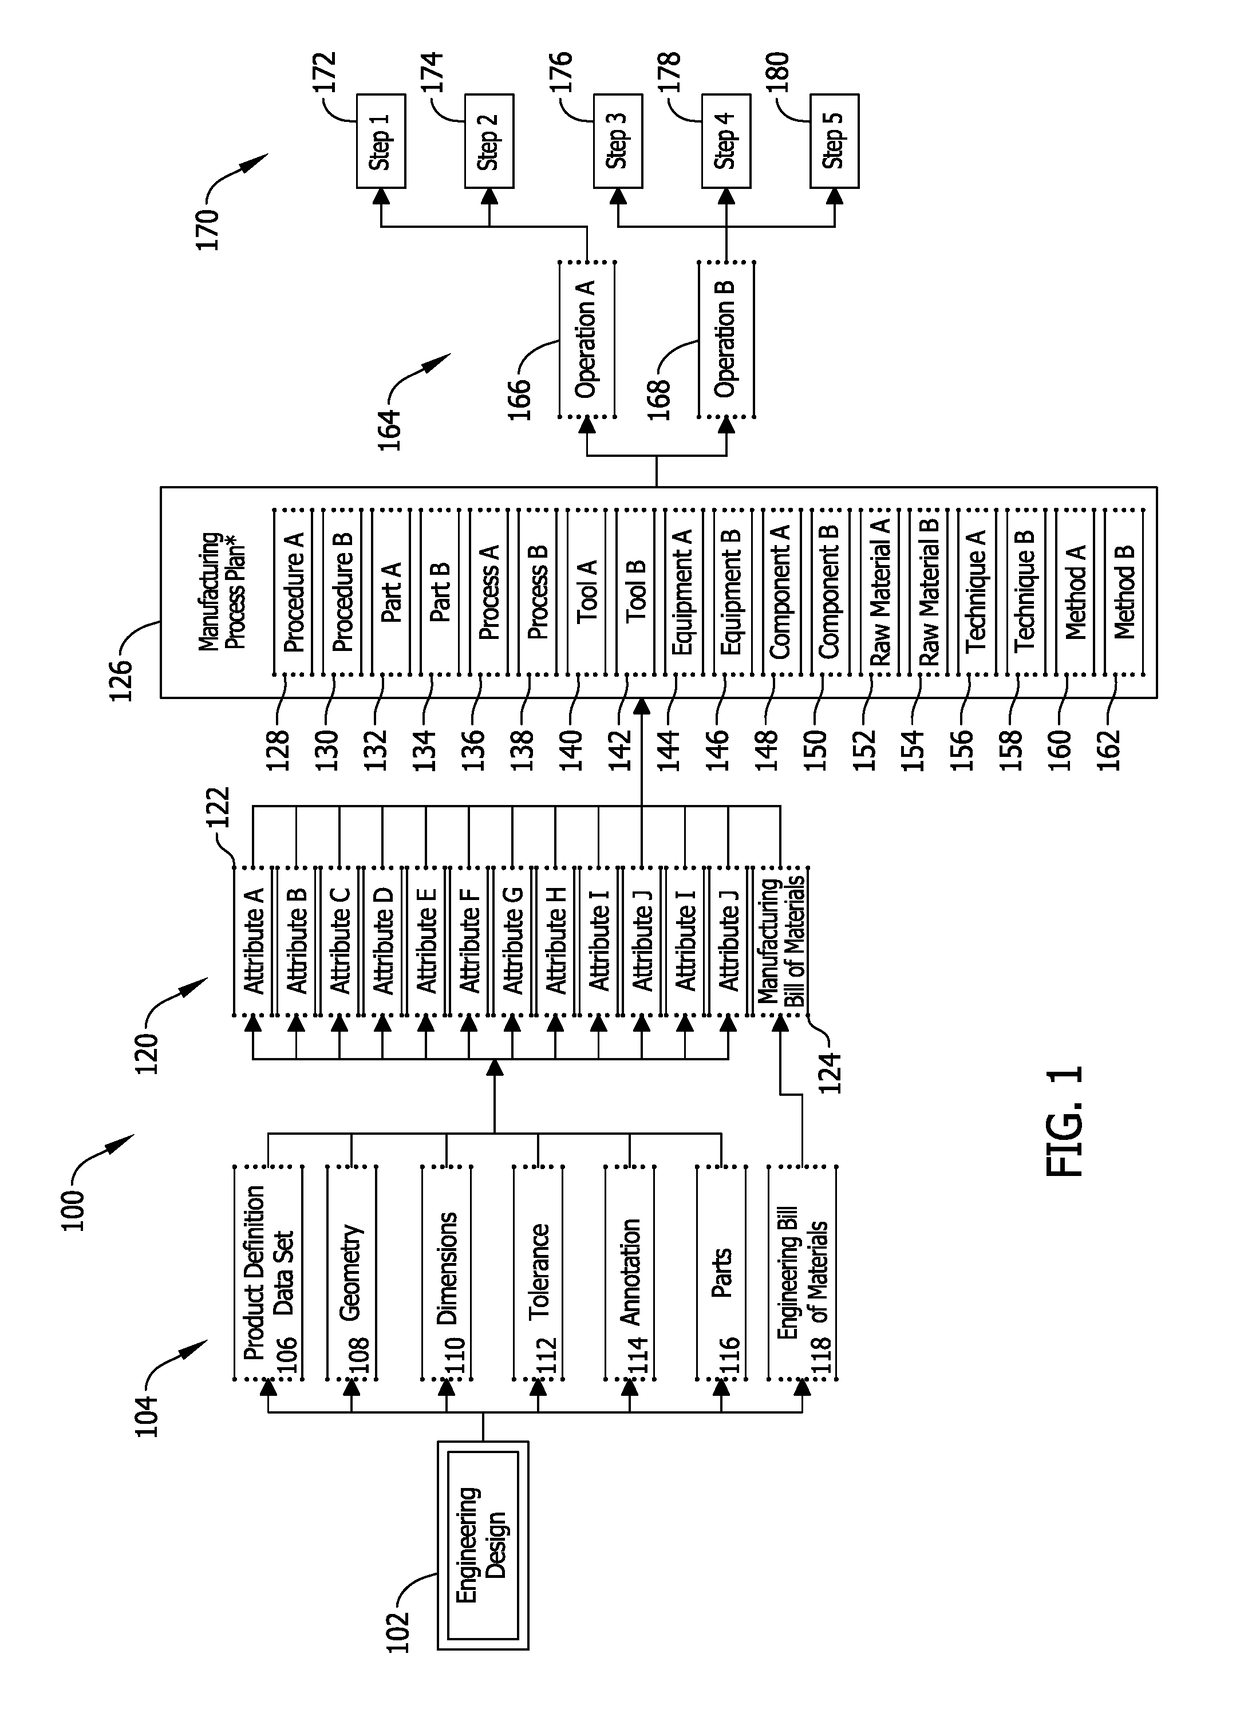 System and methods for managing changes to a product in a manufacturing environment including a minor model relational design